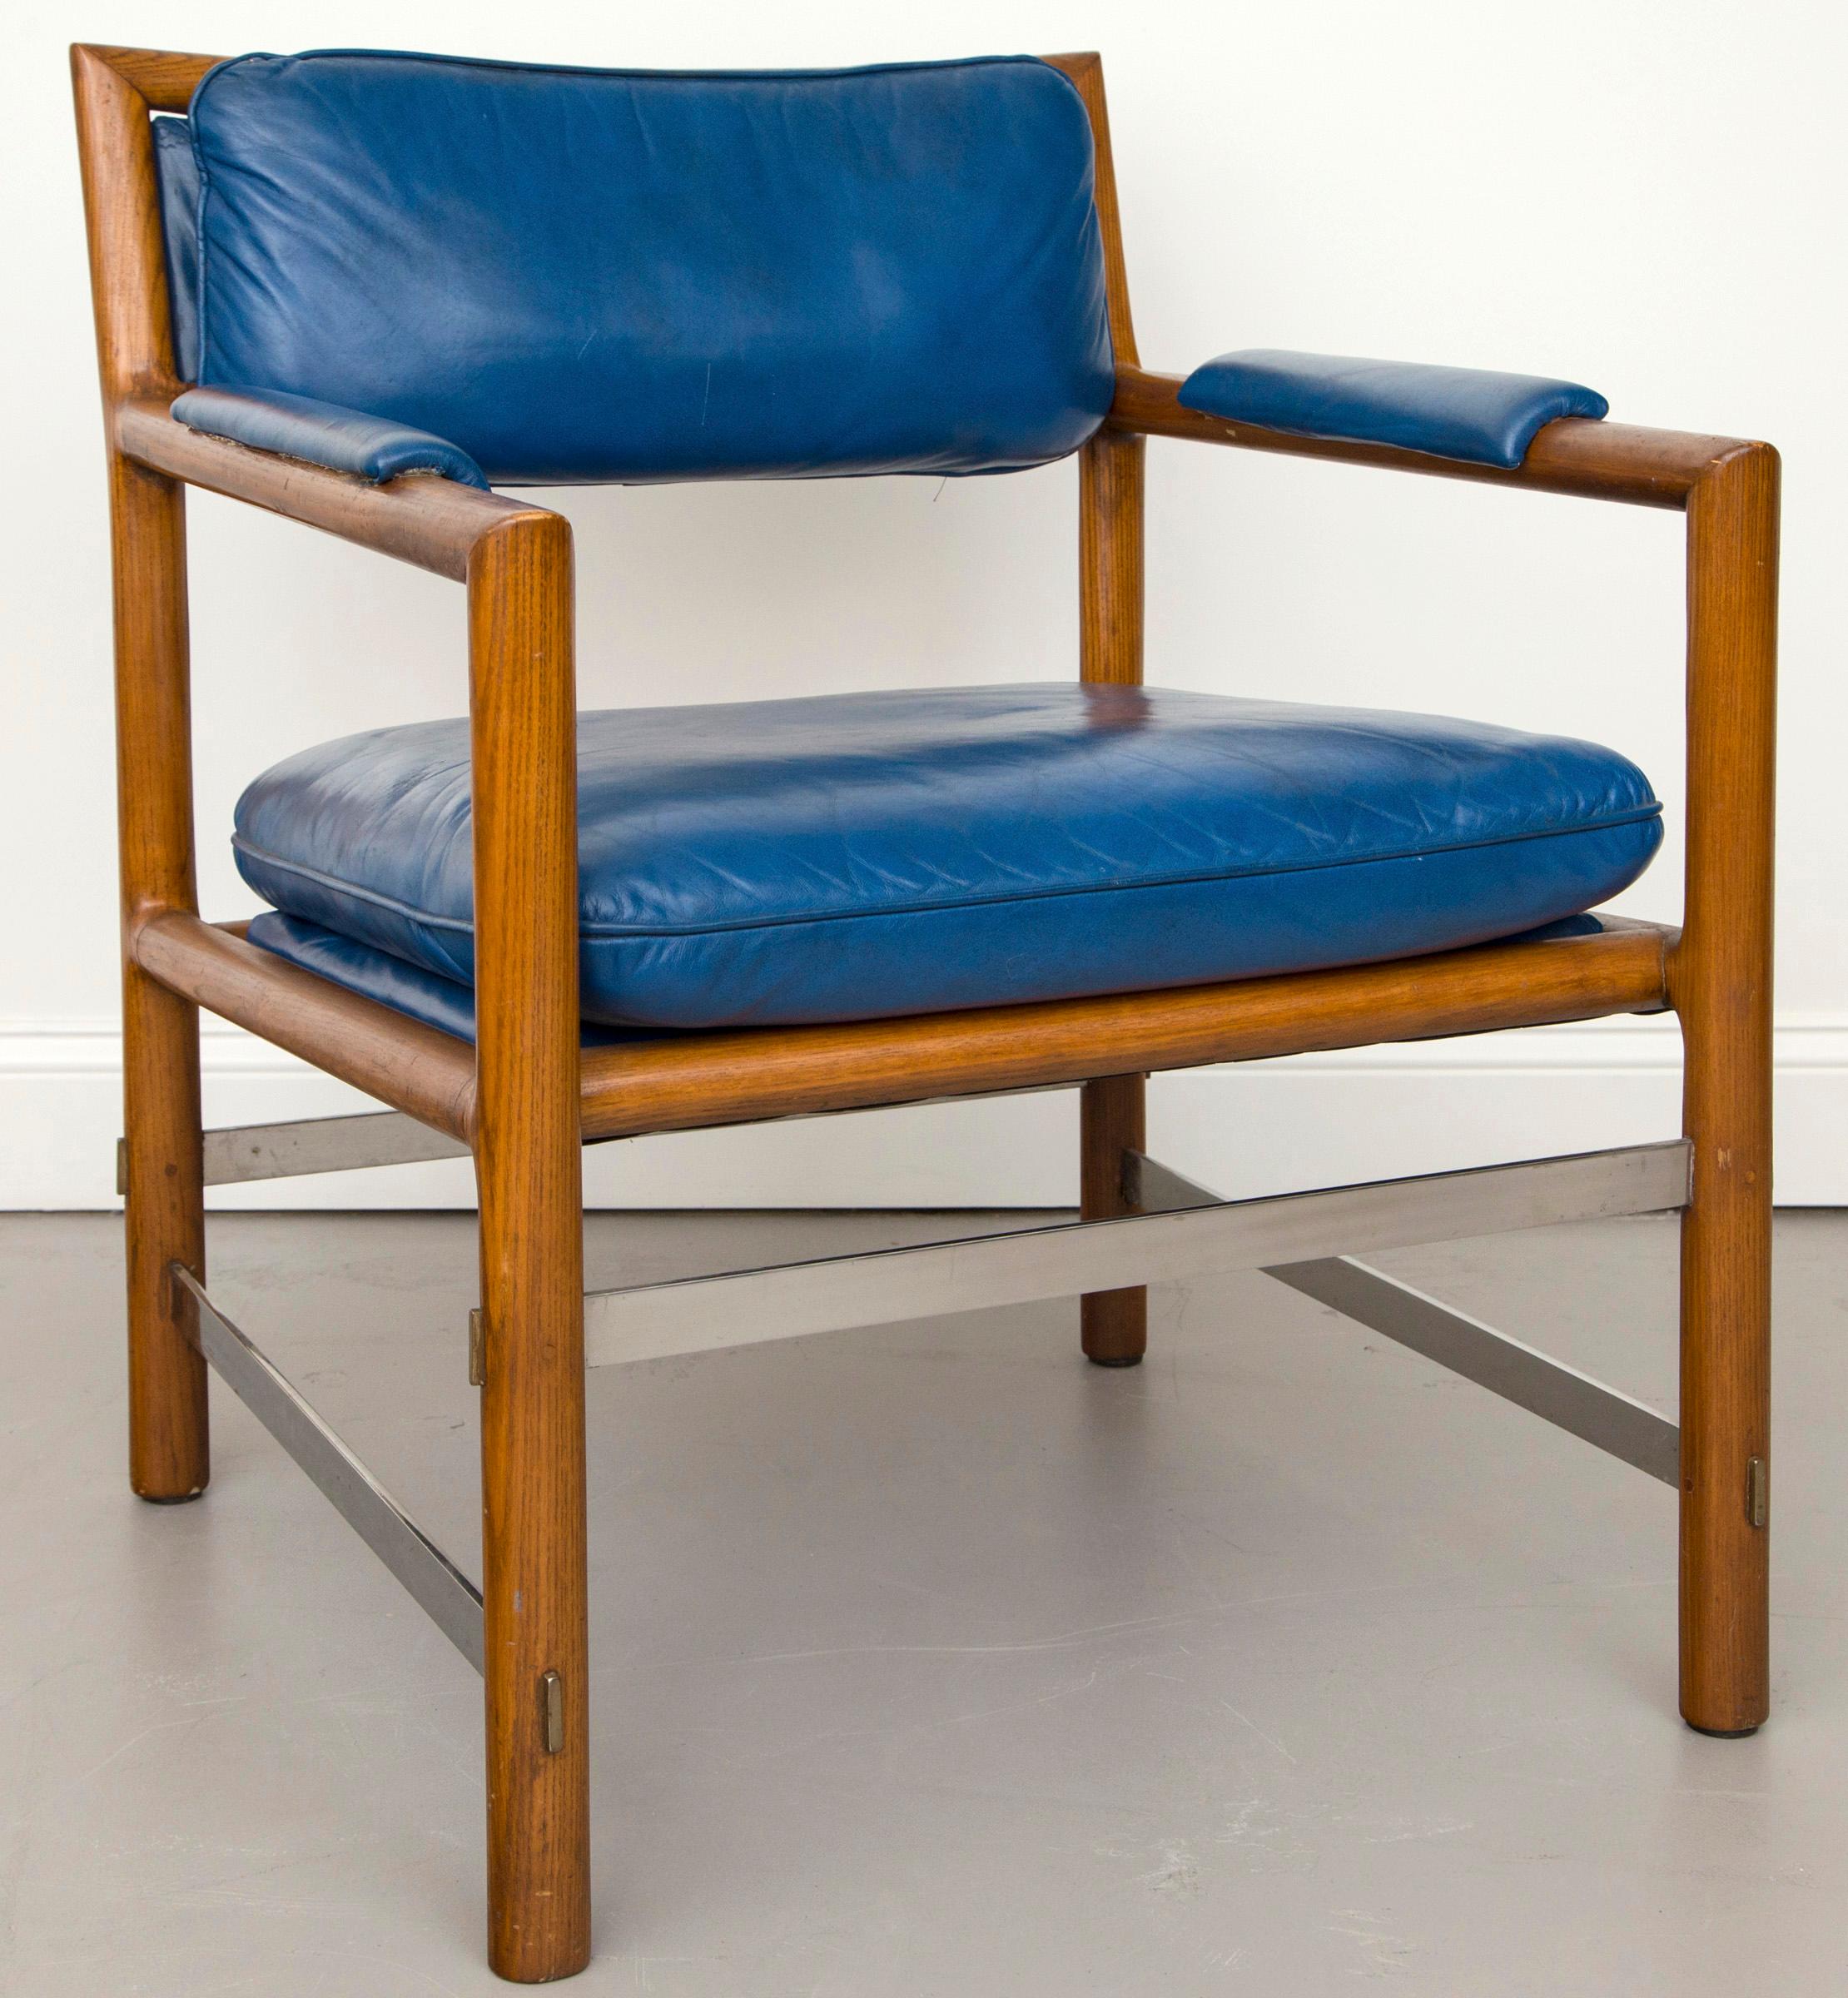 Mid-Century Modern Ed Wormley for Dunbar Blue Leather, Wood and Stainless Steel Chairs, Set of 4